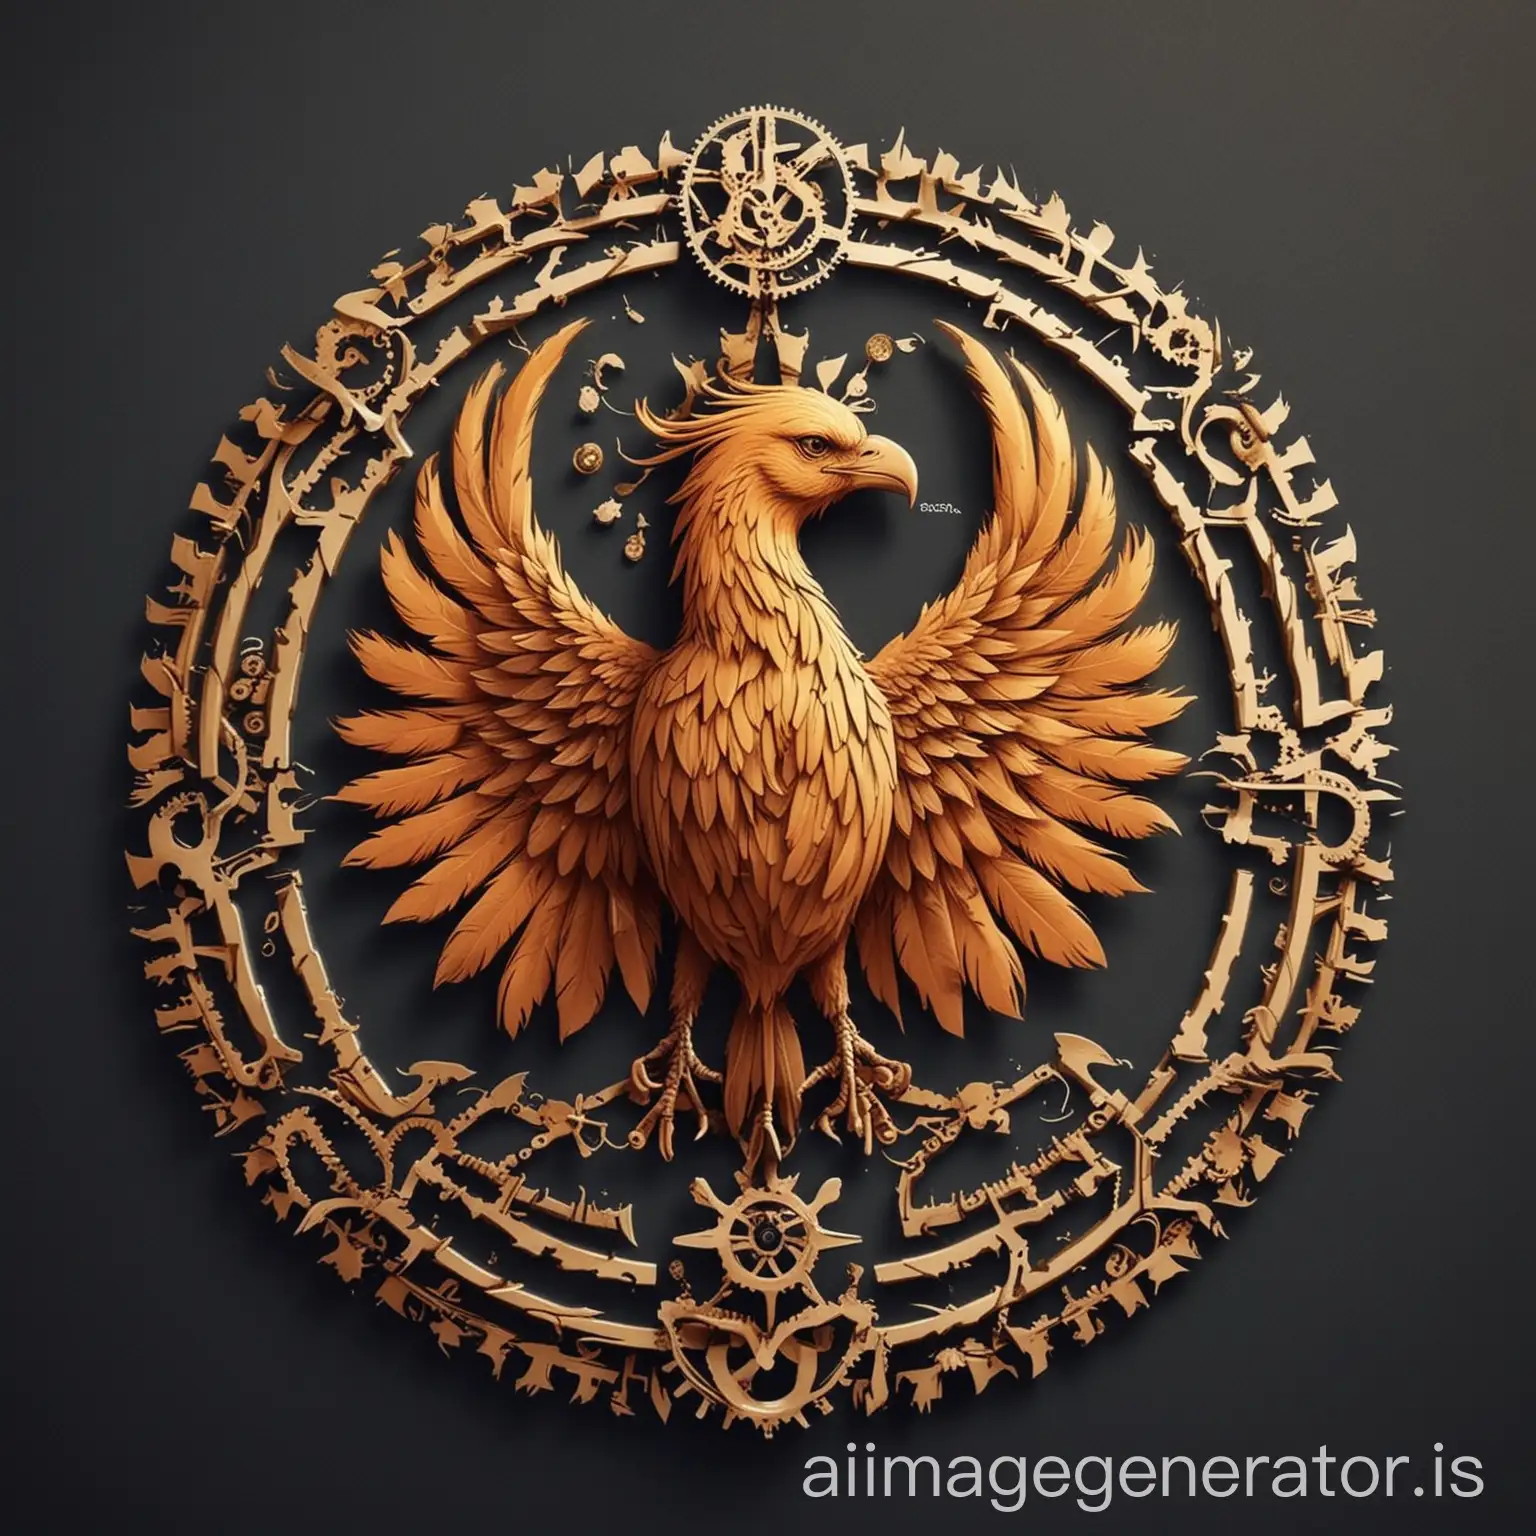 i want a logo for technical and vocational university that show Islamic, scientific and technical sambols. i want this logo circular and use Phoenix feathers without the use of a bird's head and use a gears around of logo that all of thing put in this gear meaning of the connection between industry and science